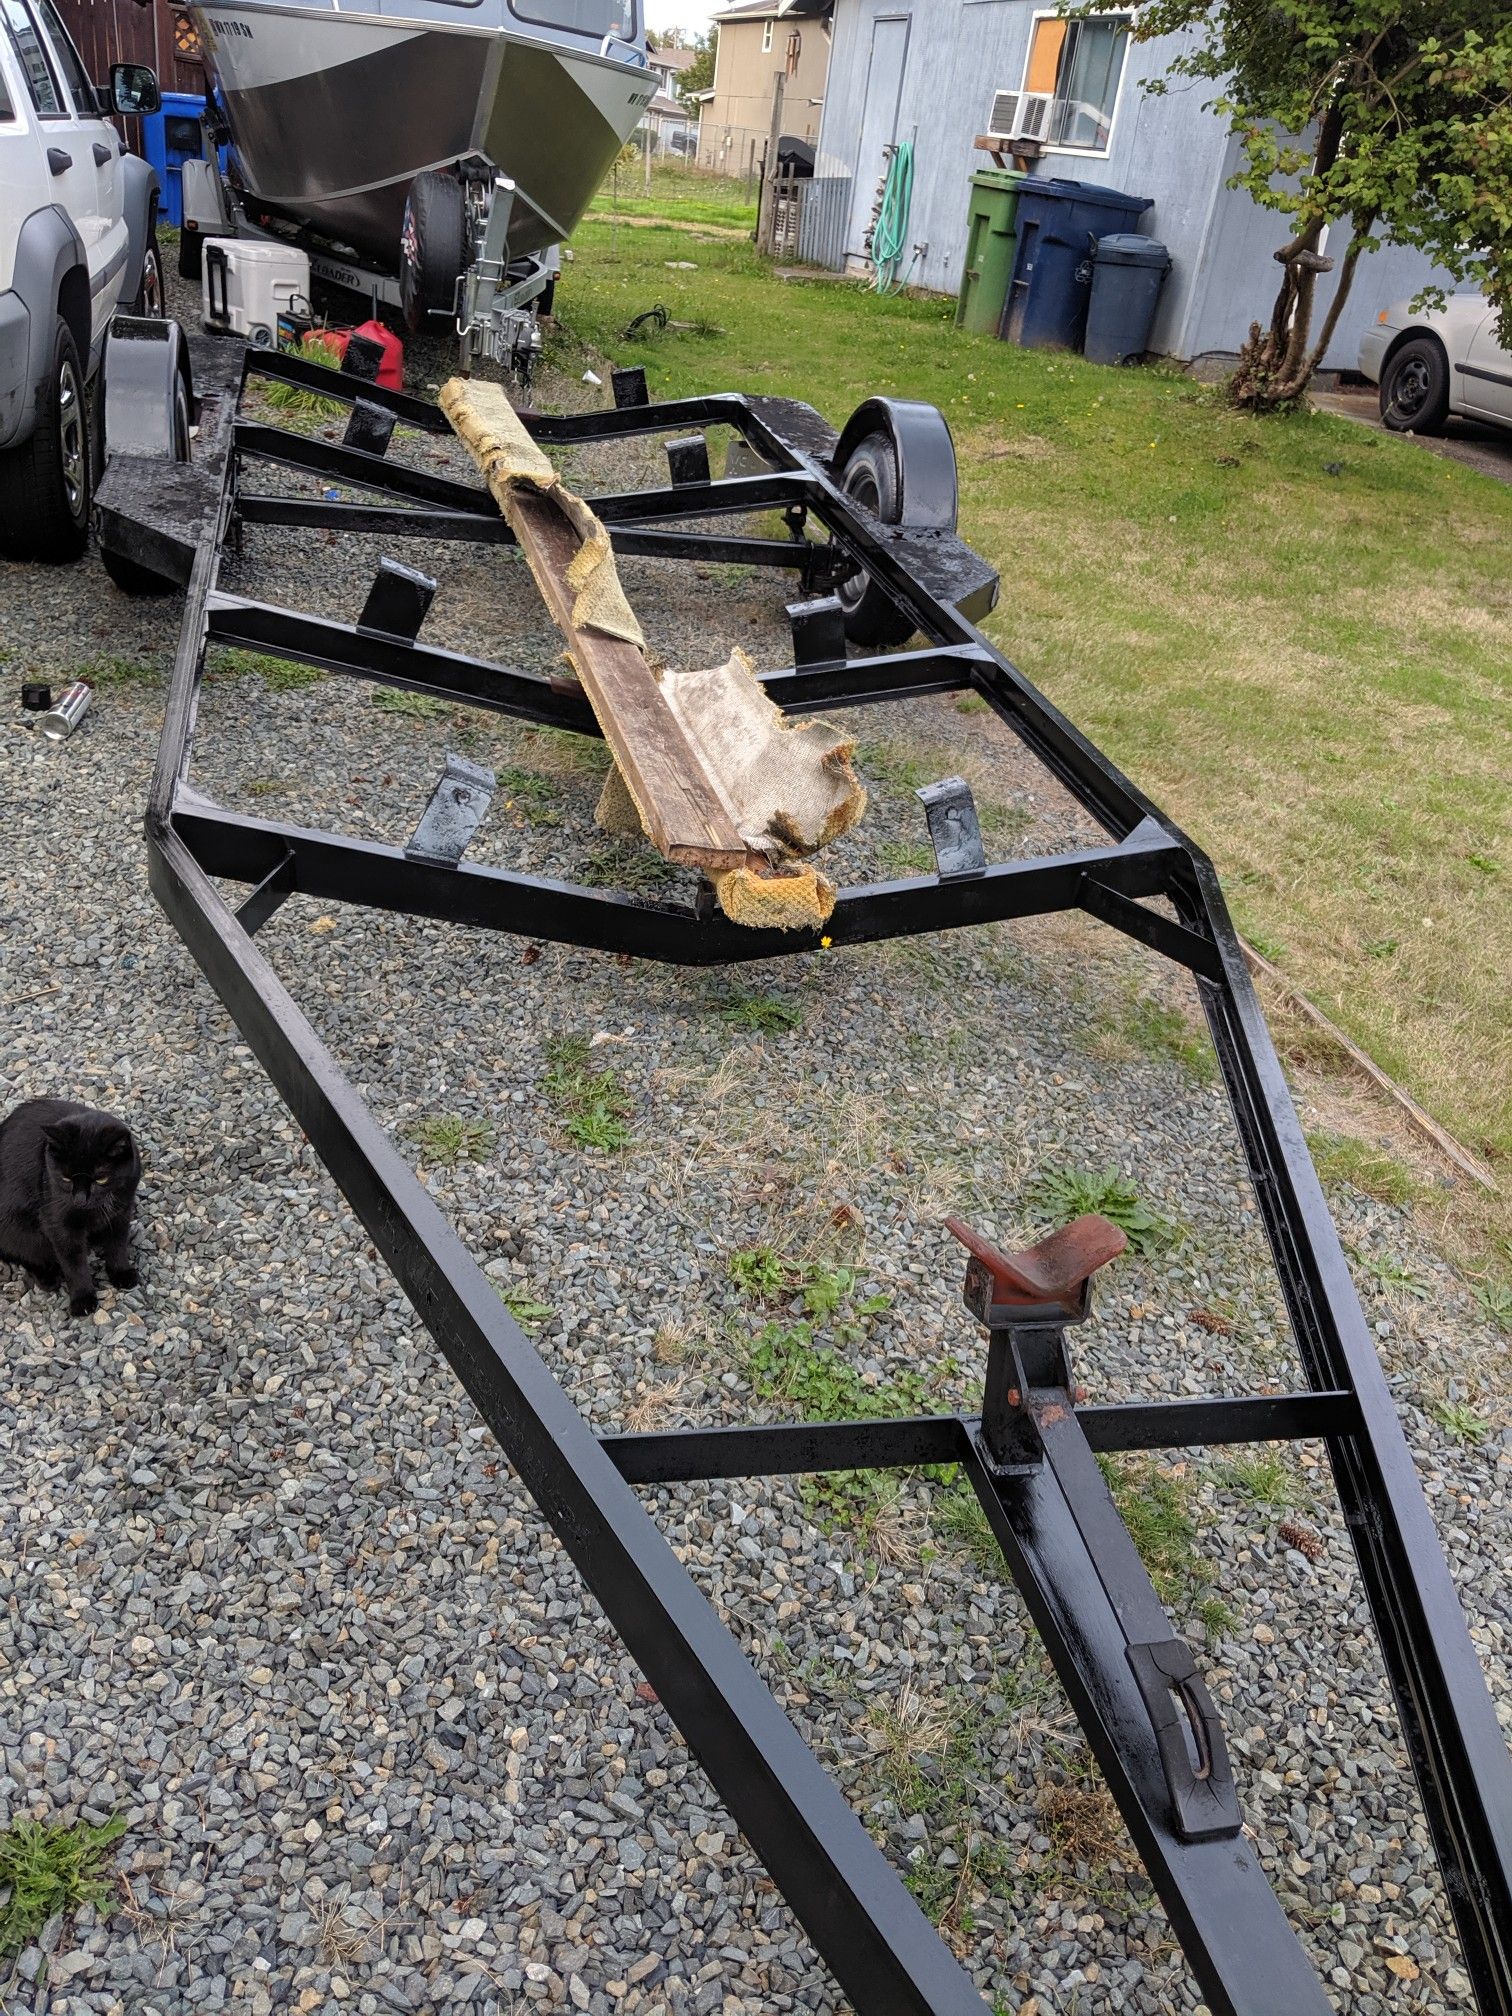 Flatbed trailer project with title!